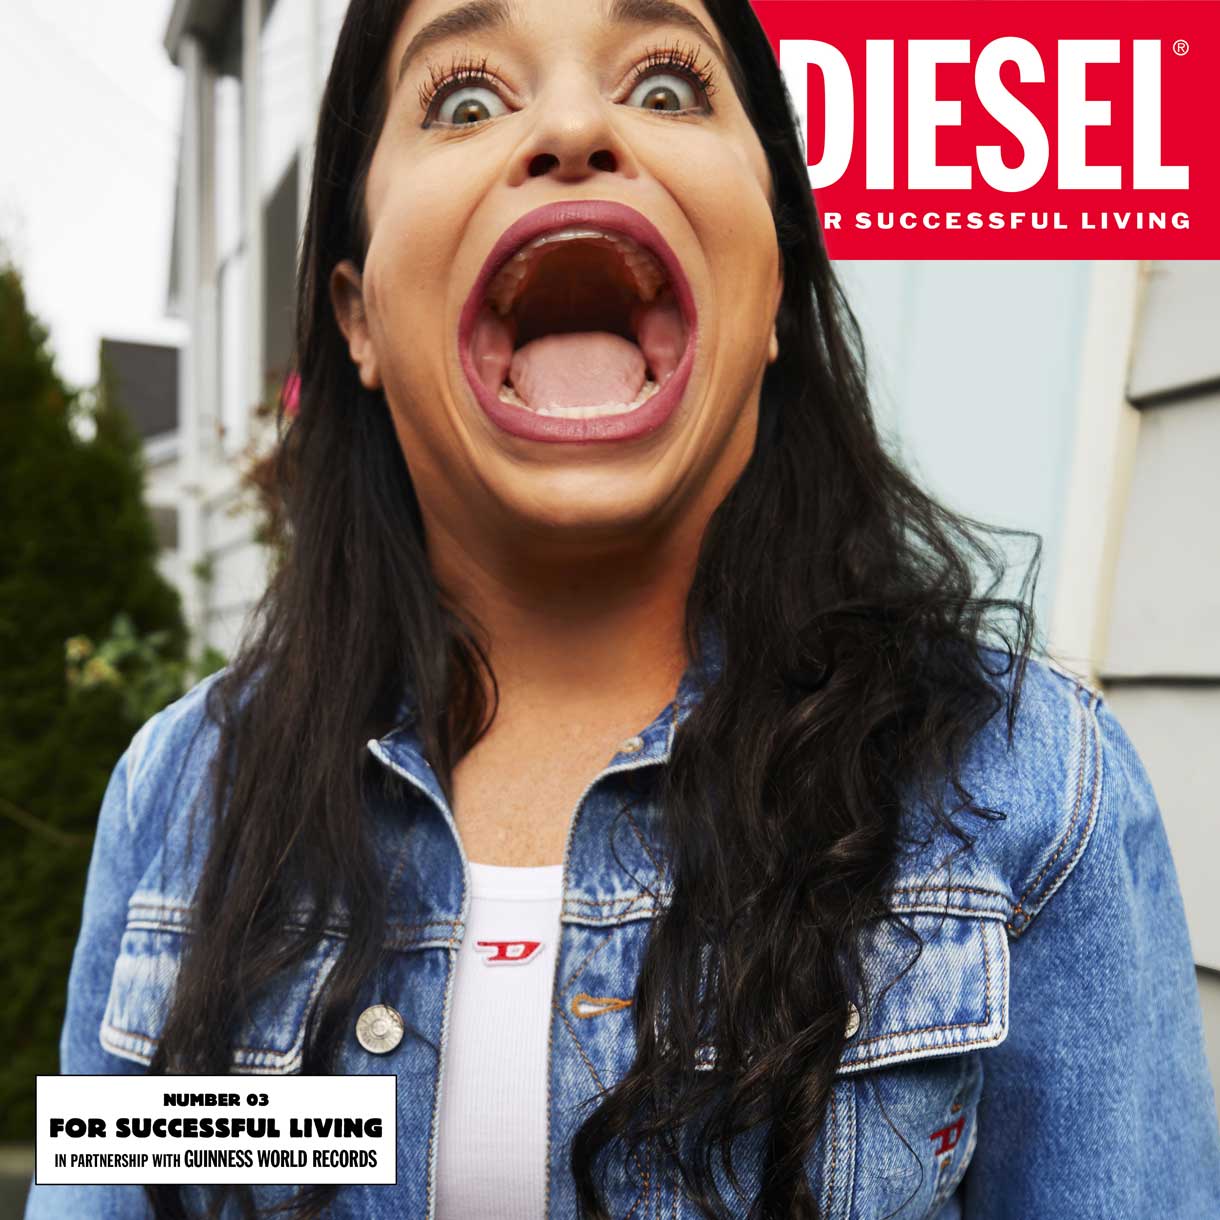 DIESEL-partners-with-Guinness-World-Record-holders